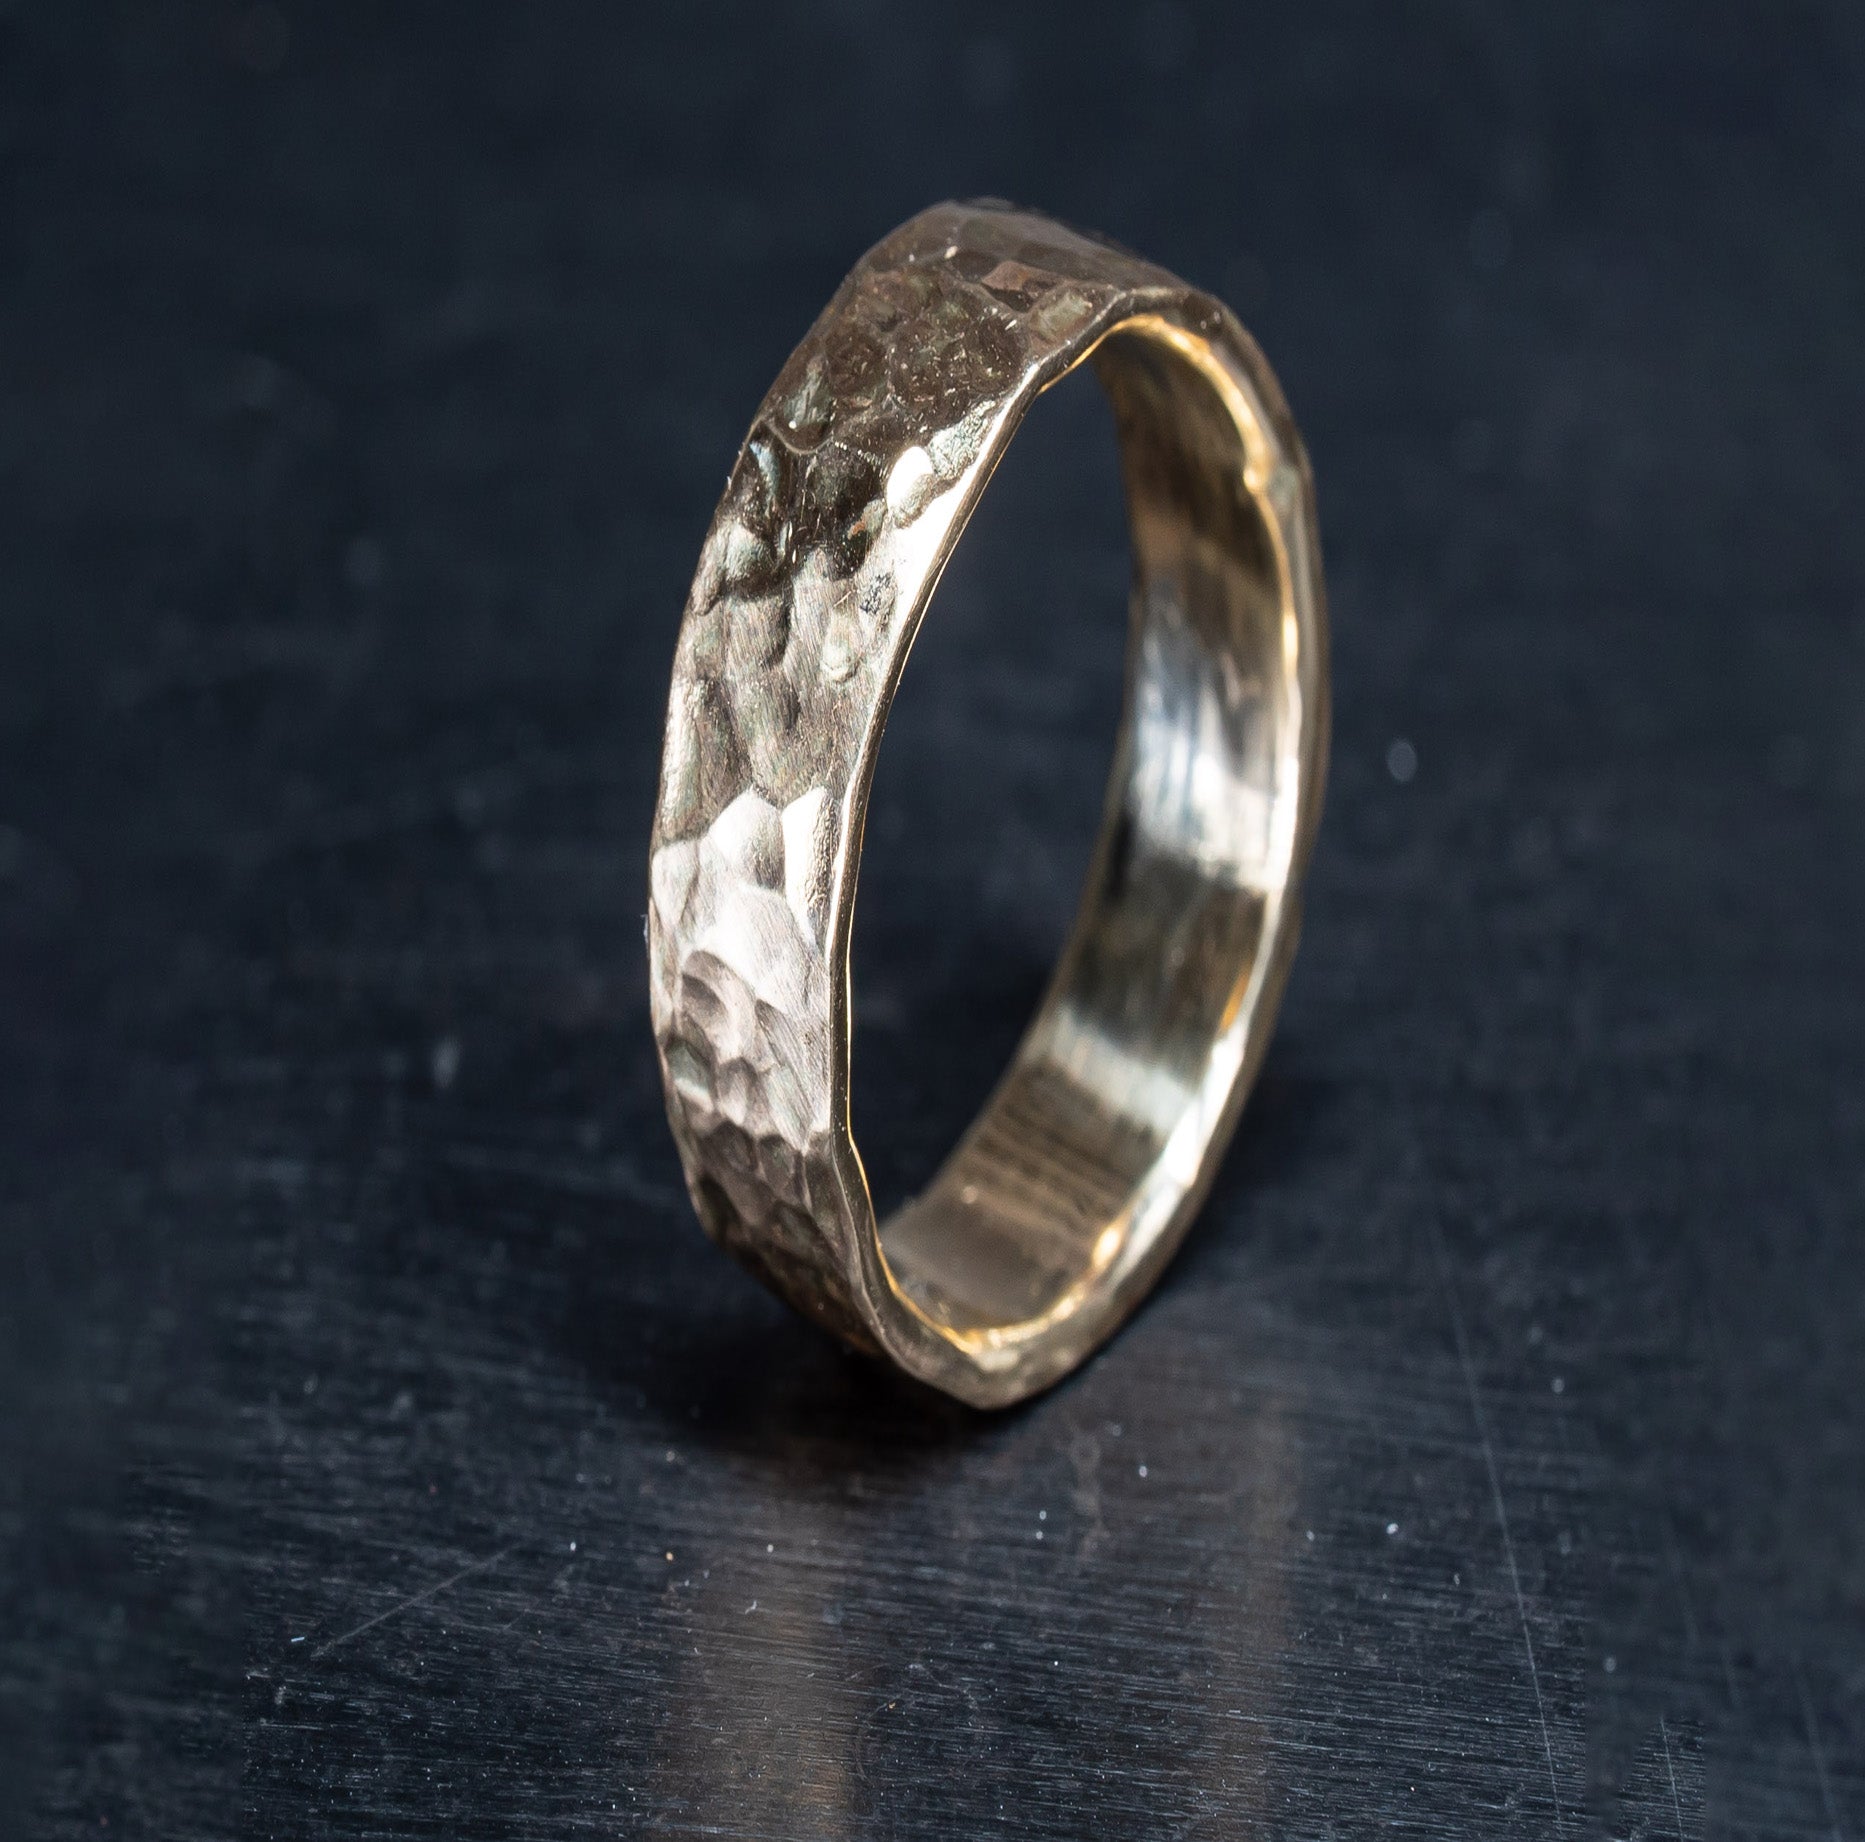 Side view of the dreaming wedding ring